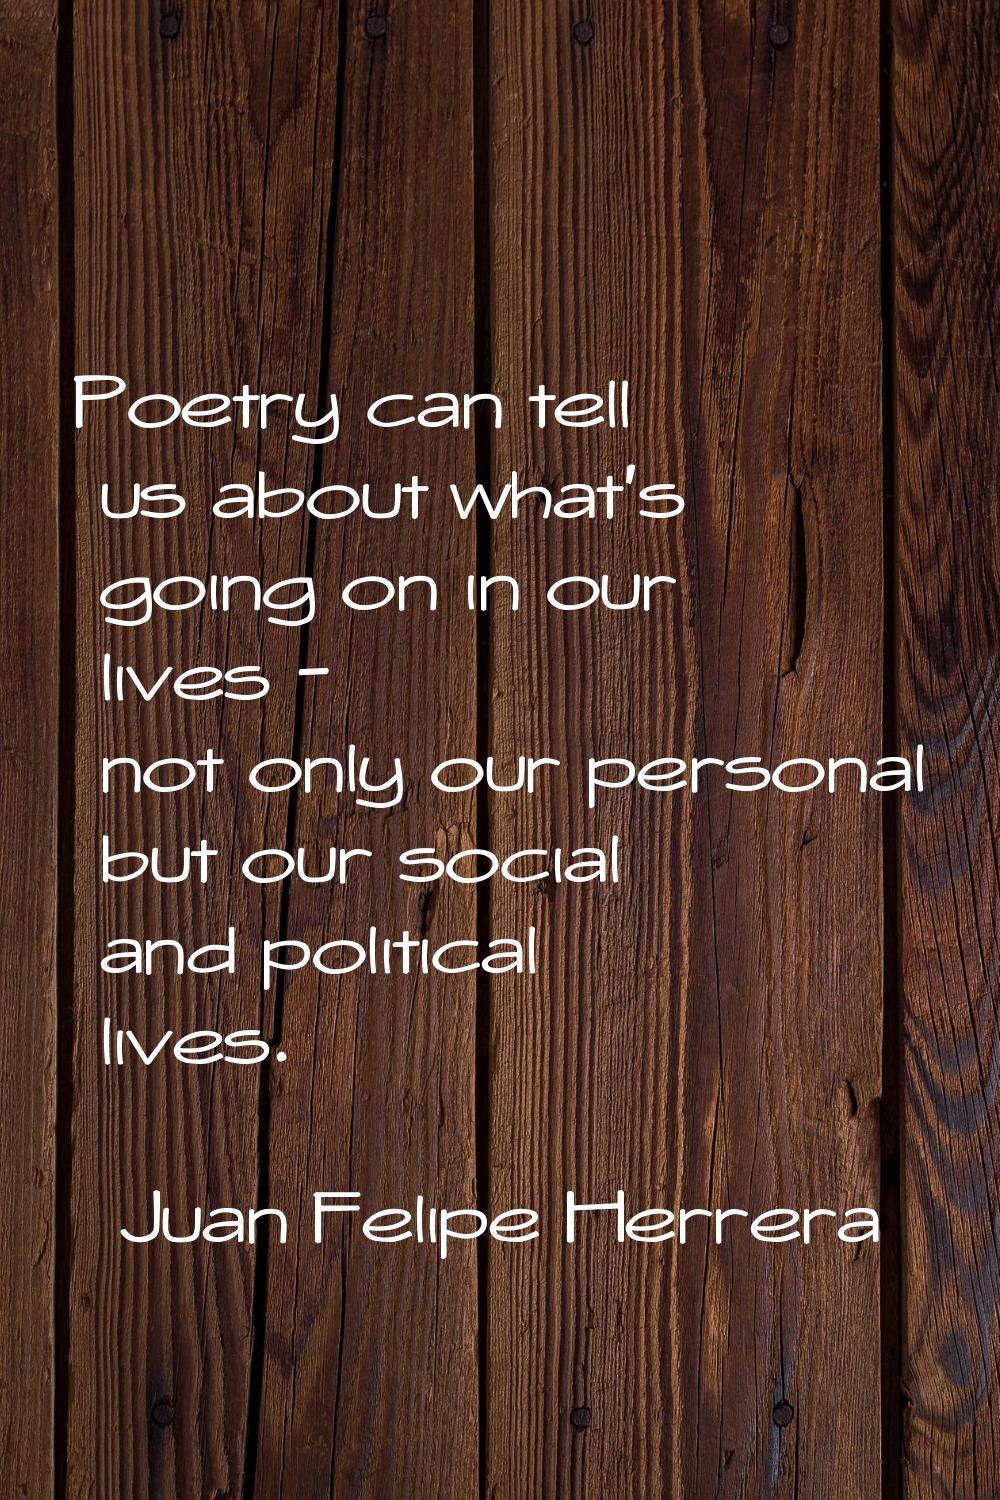 Poetry can tell us about what's going on in our lives - not only our personal but our social and po